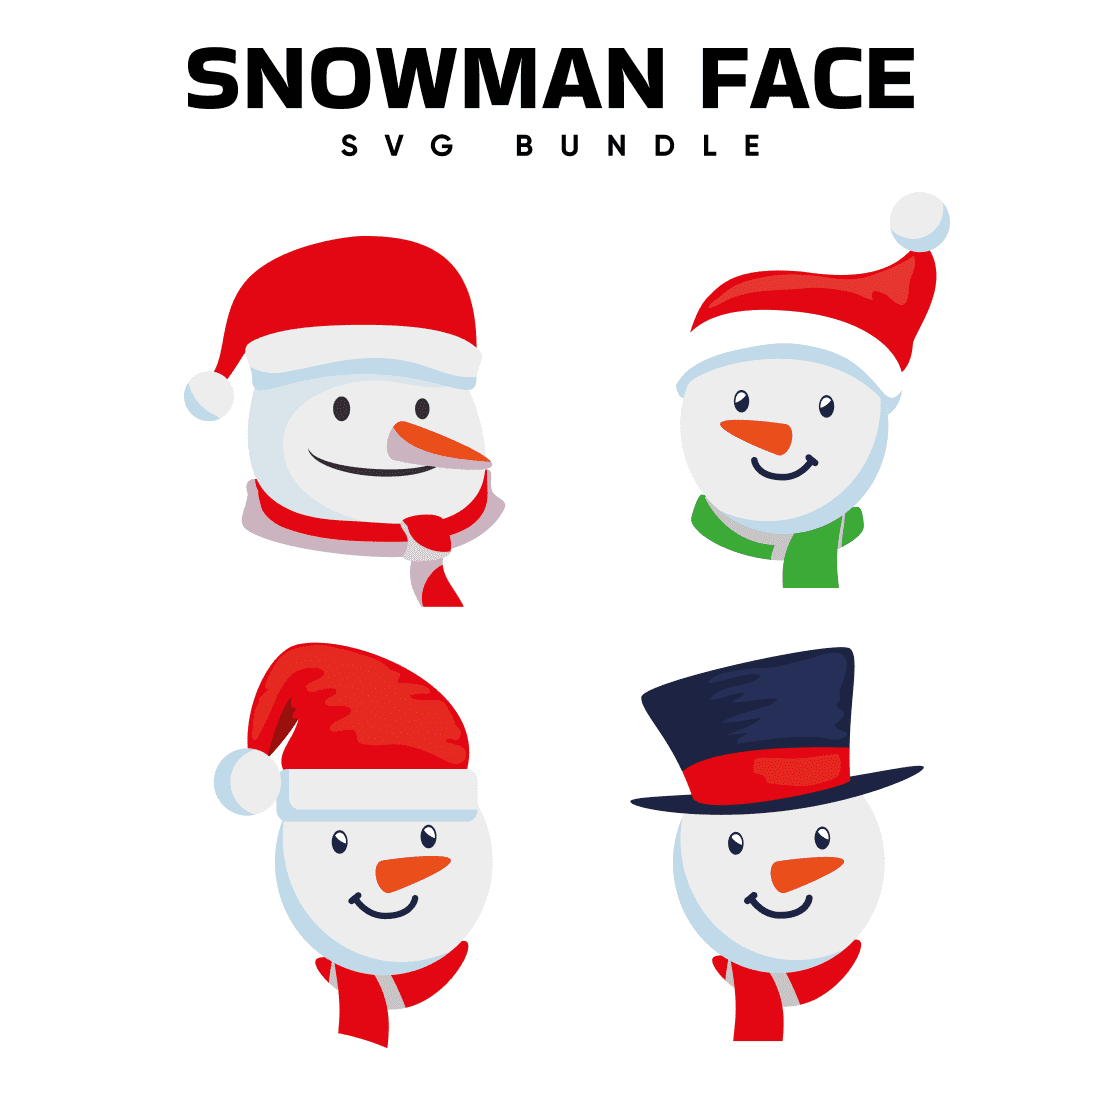 Image of snowmen in bright clothes.